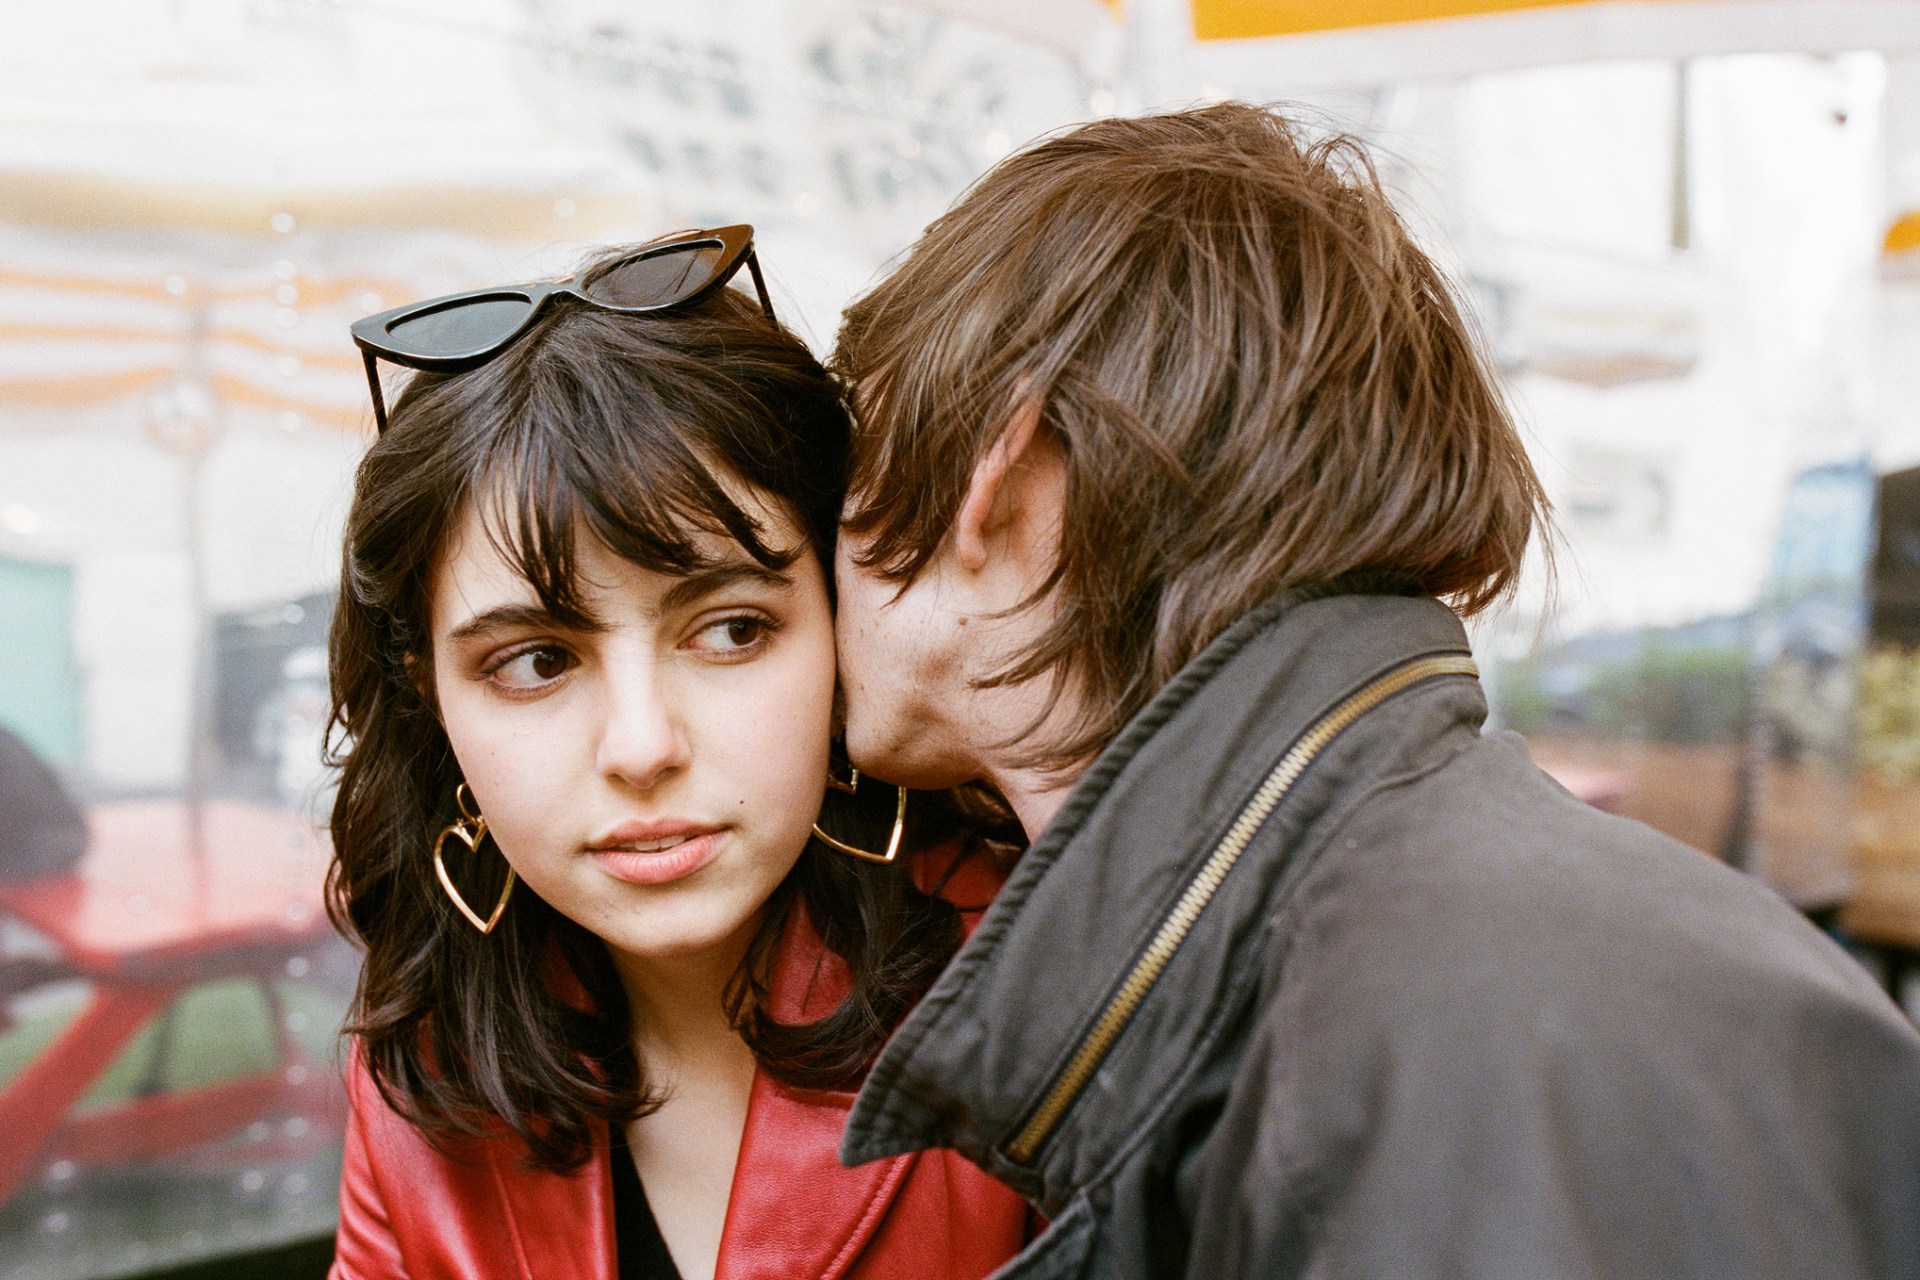 6 Reasons It’s So Hard To Get Over An Almost Relationship